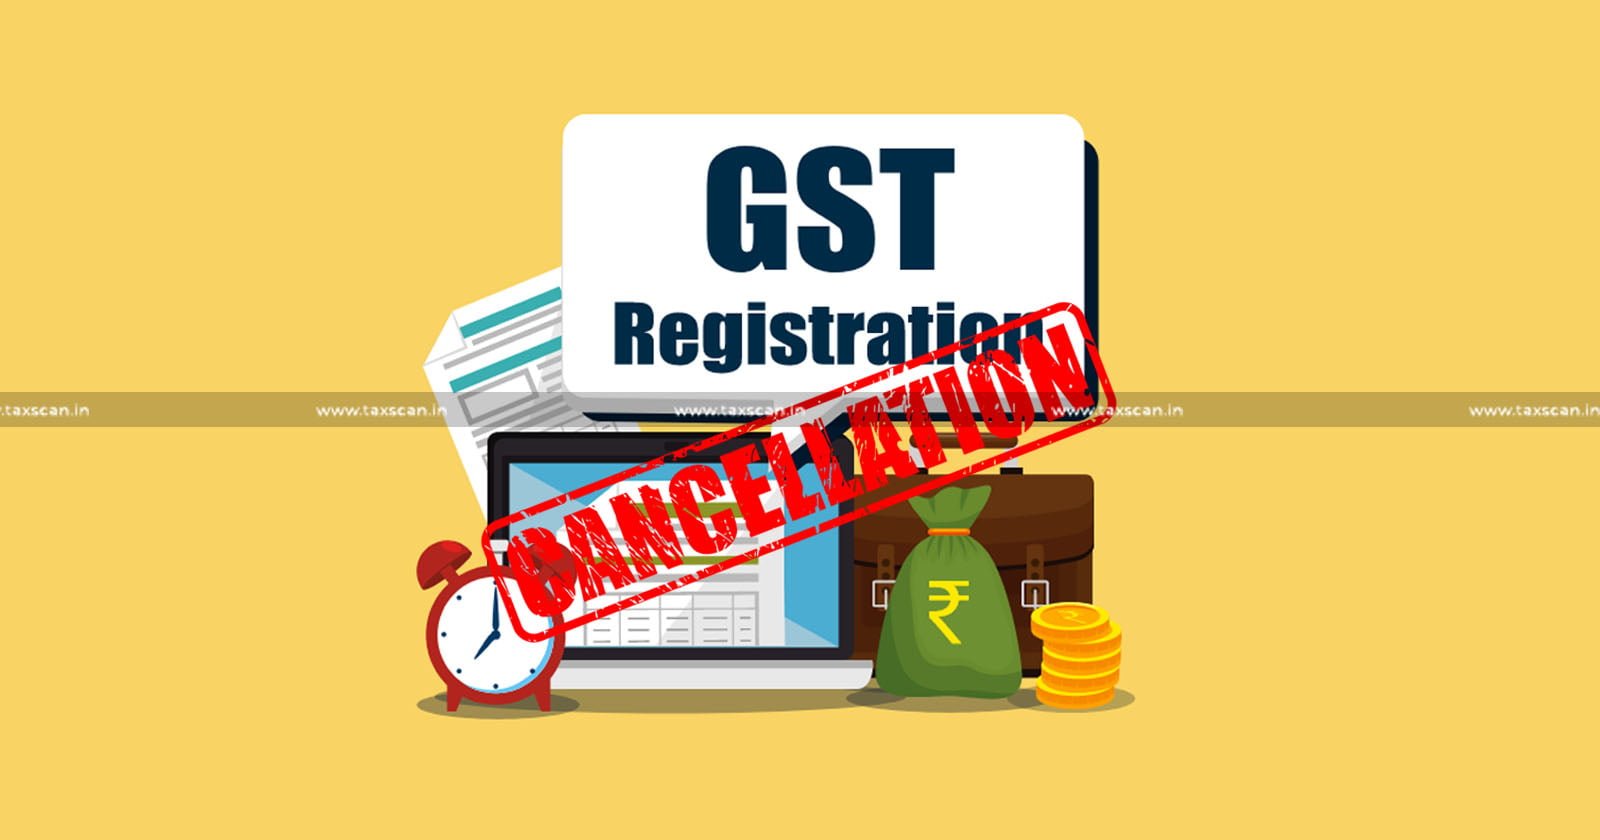 Cancellation of GST Registration due to Non-filing of returns for 6 consecutive months: Uttarakhand HC directs to pay O/s dues